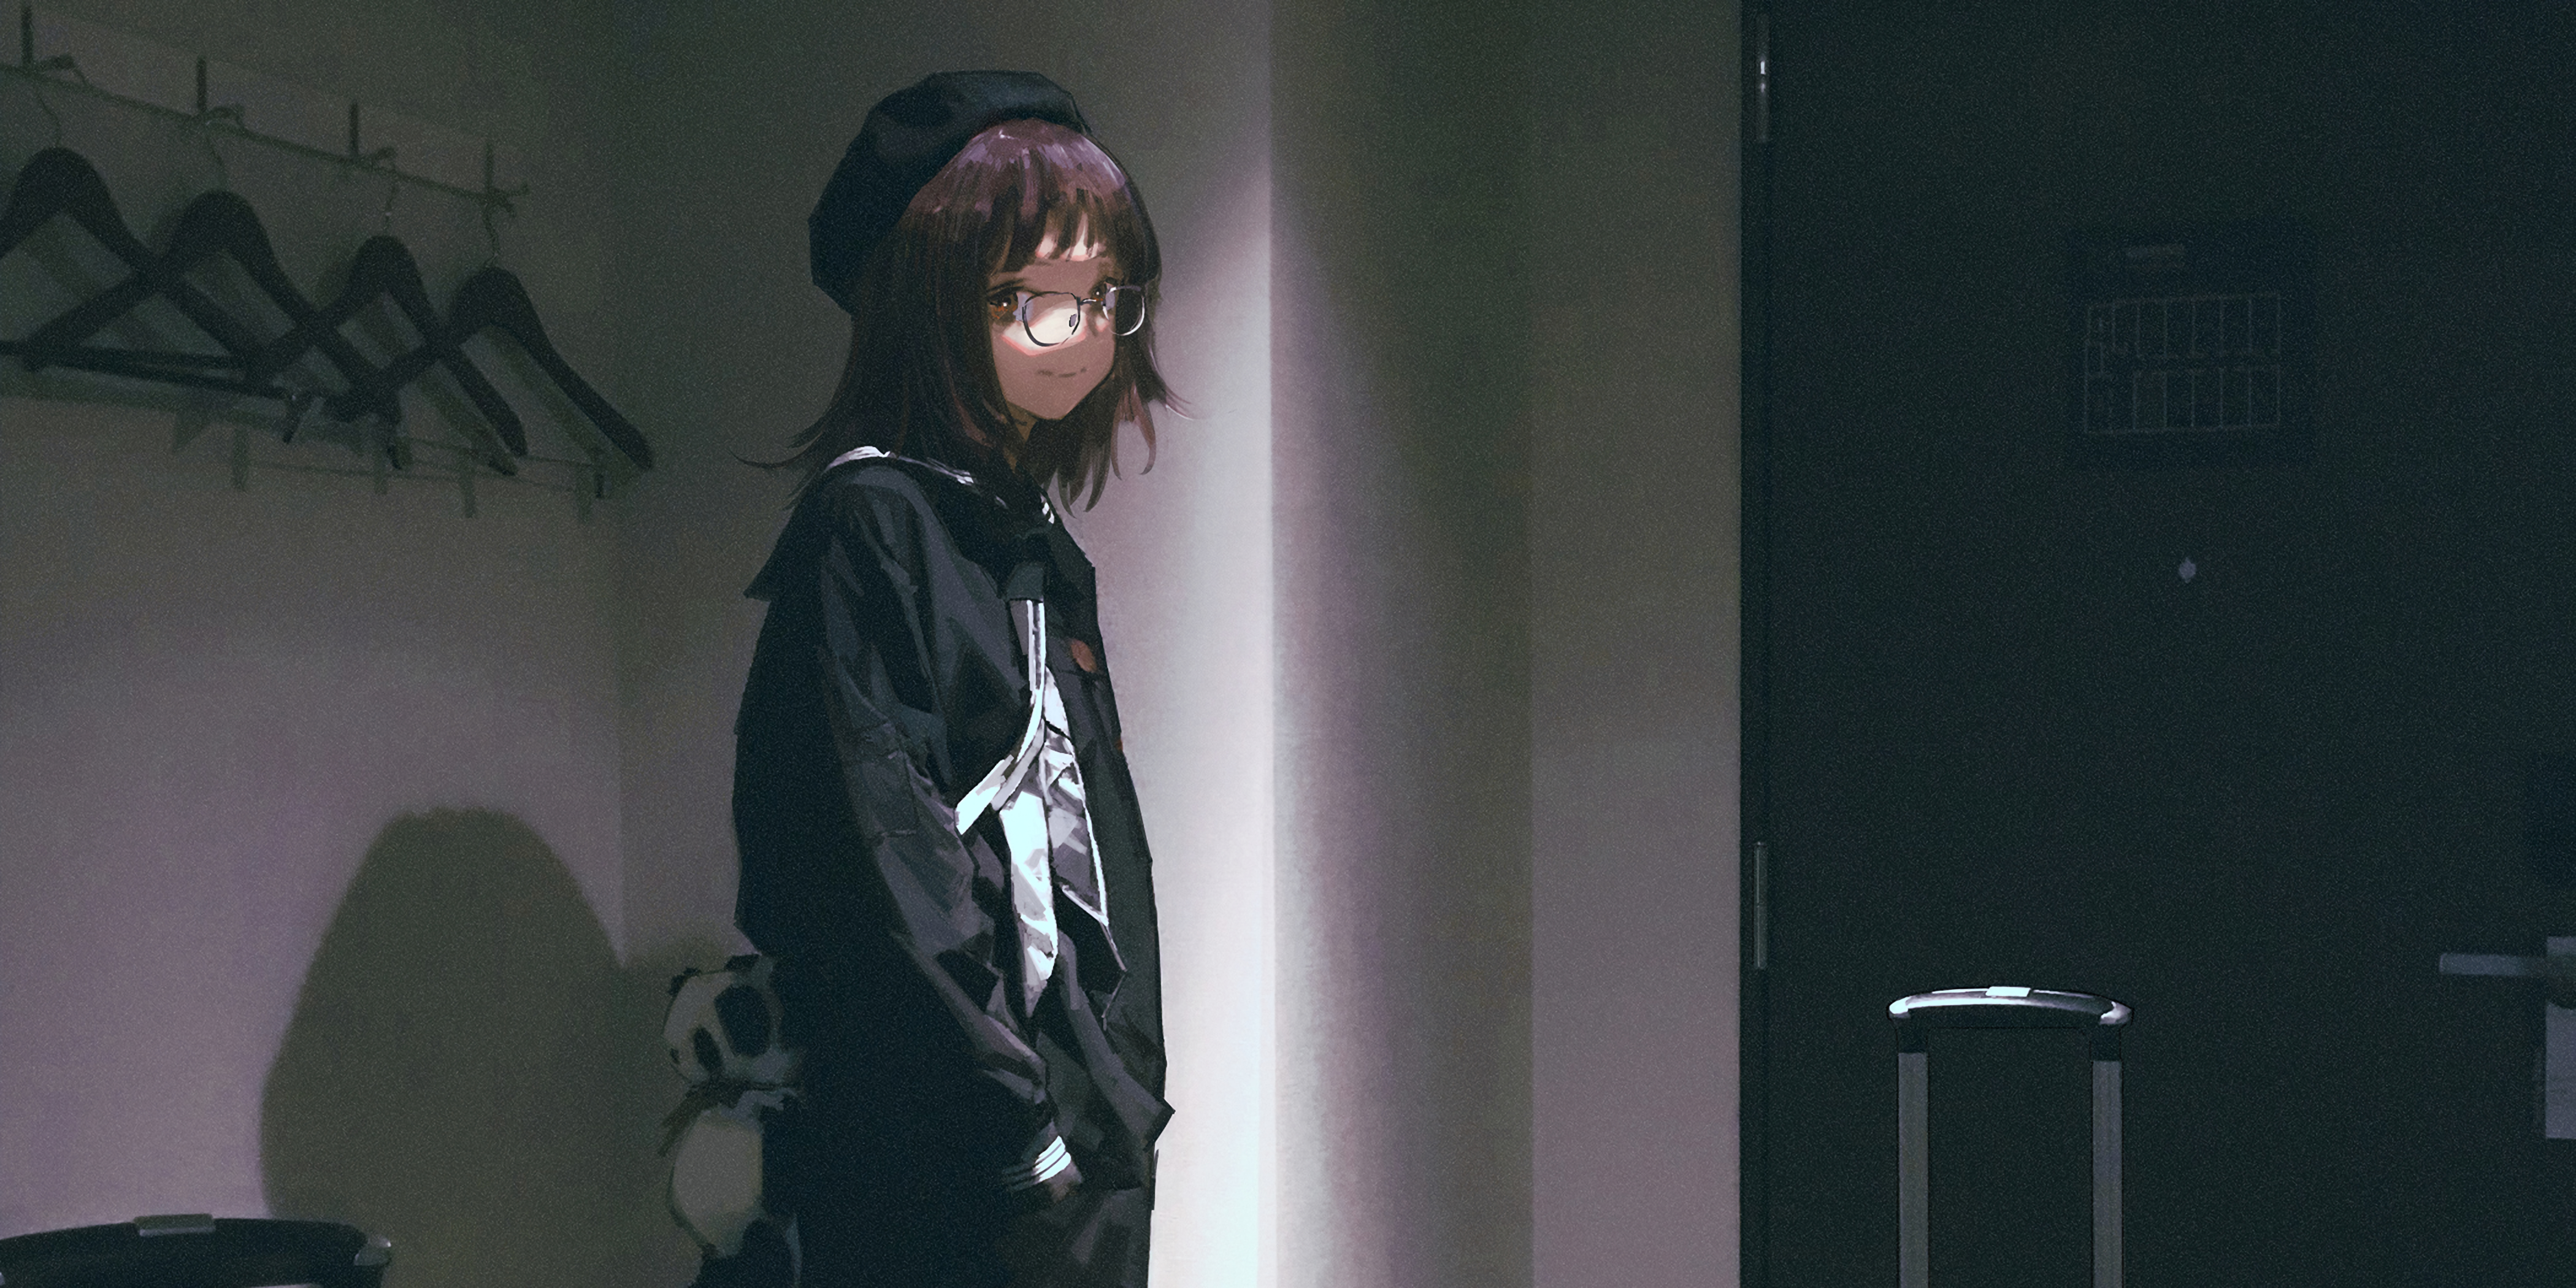 Anime 4200x2100 Wang Xi anime girls anime looking at viewer hat women with hats glasses women with glasses closed mouth short hair long sleeves hanger indoors women indoors standing brunette brown eyes film grain black clothing smiling